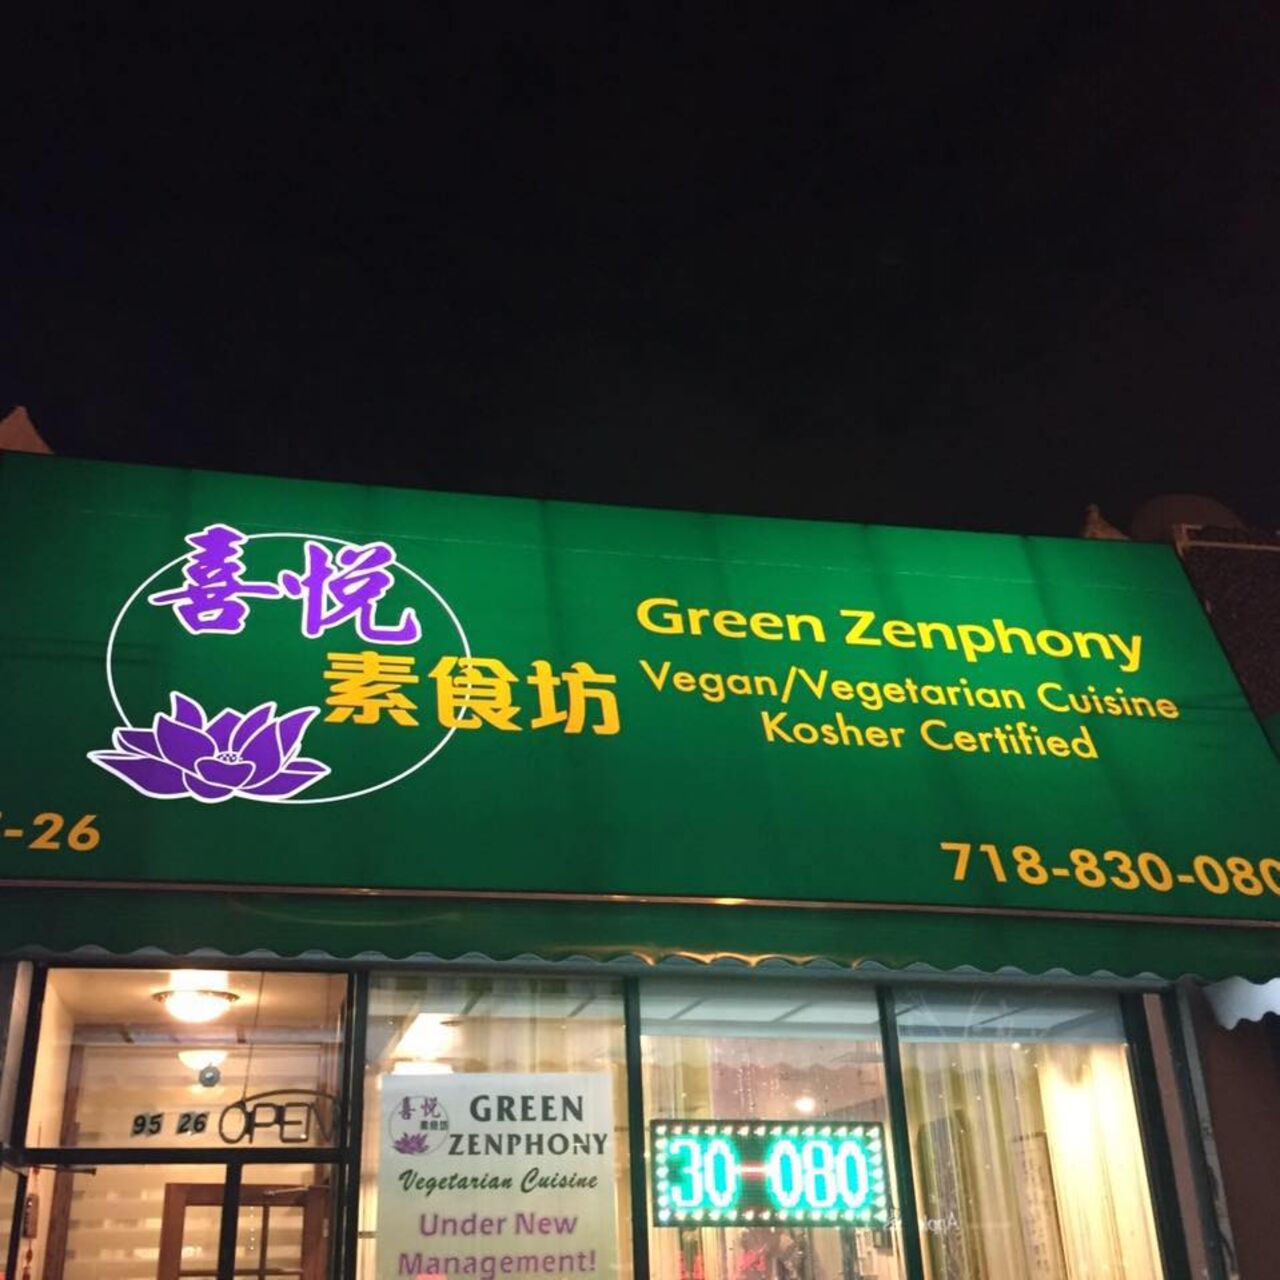 A photo of Green Zenphony